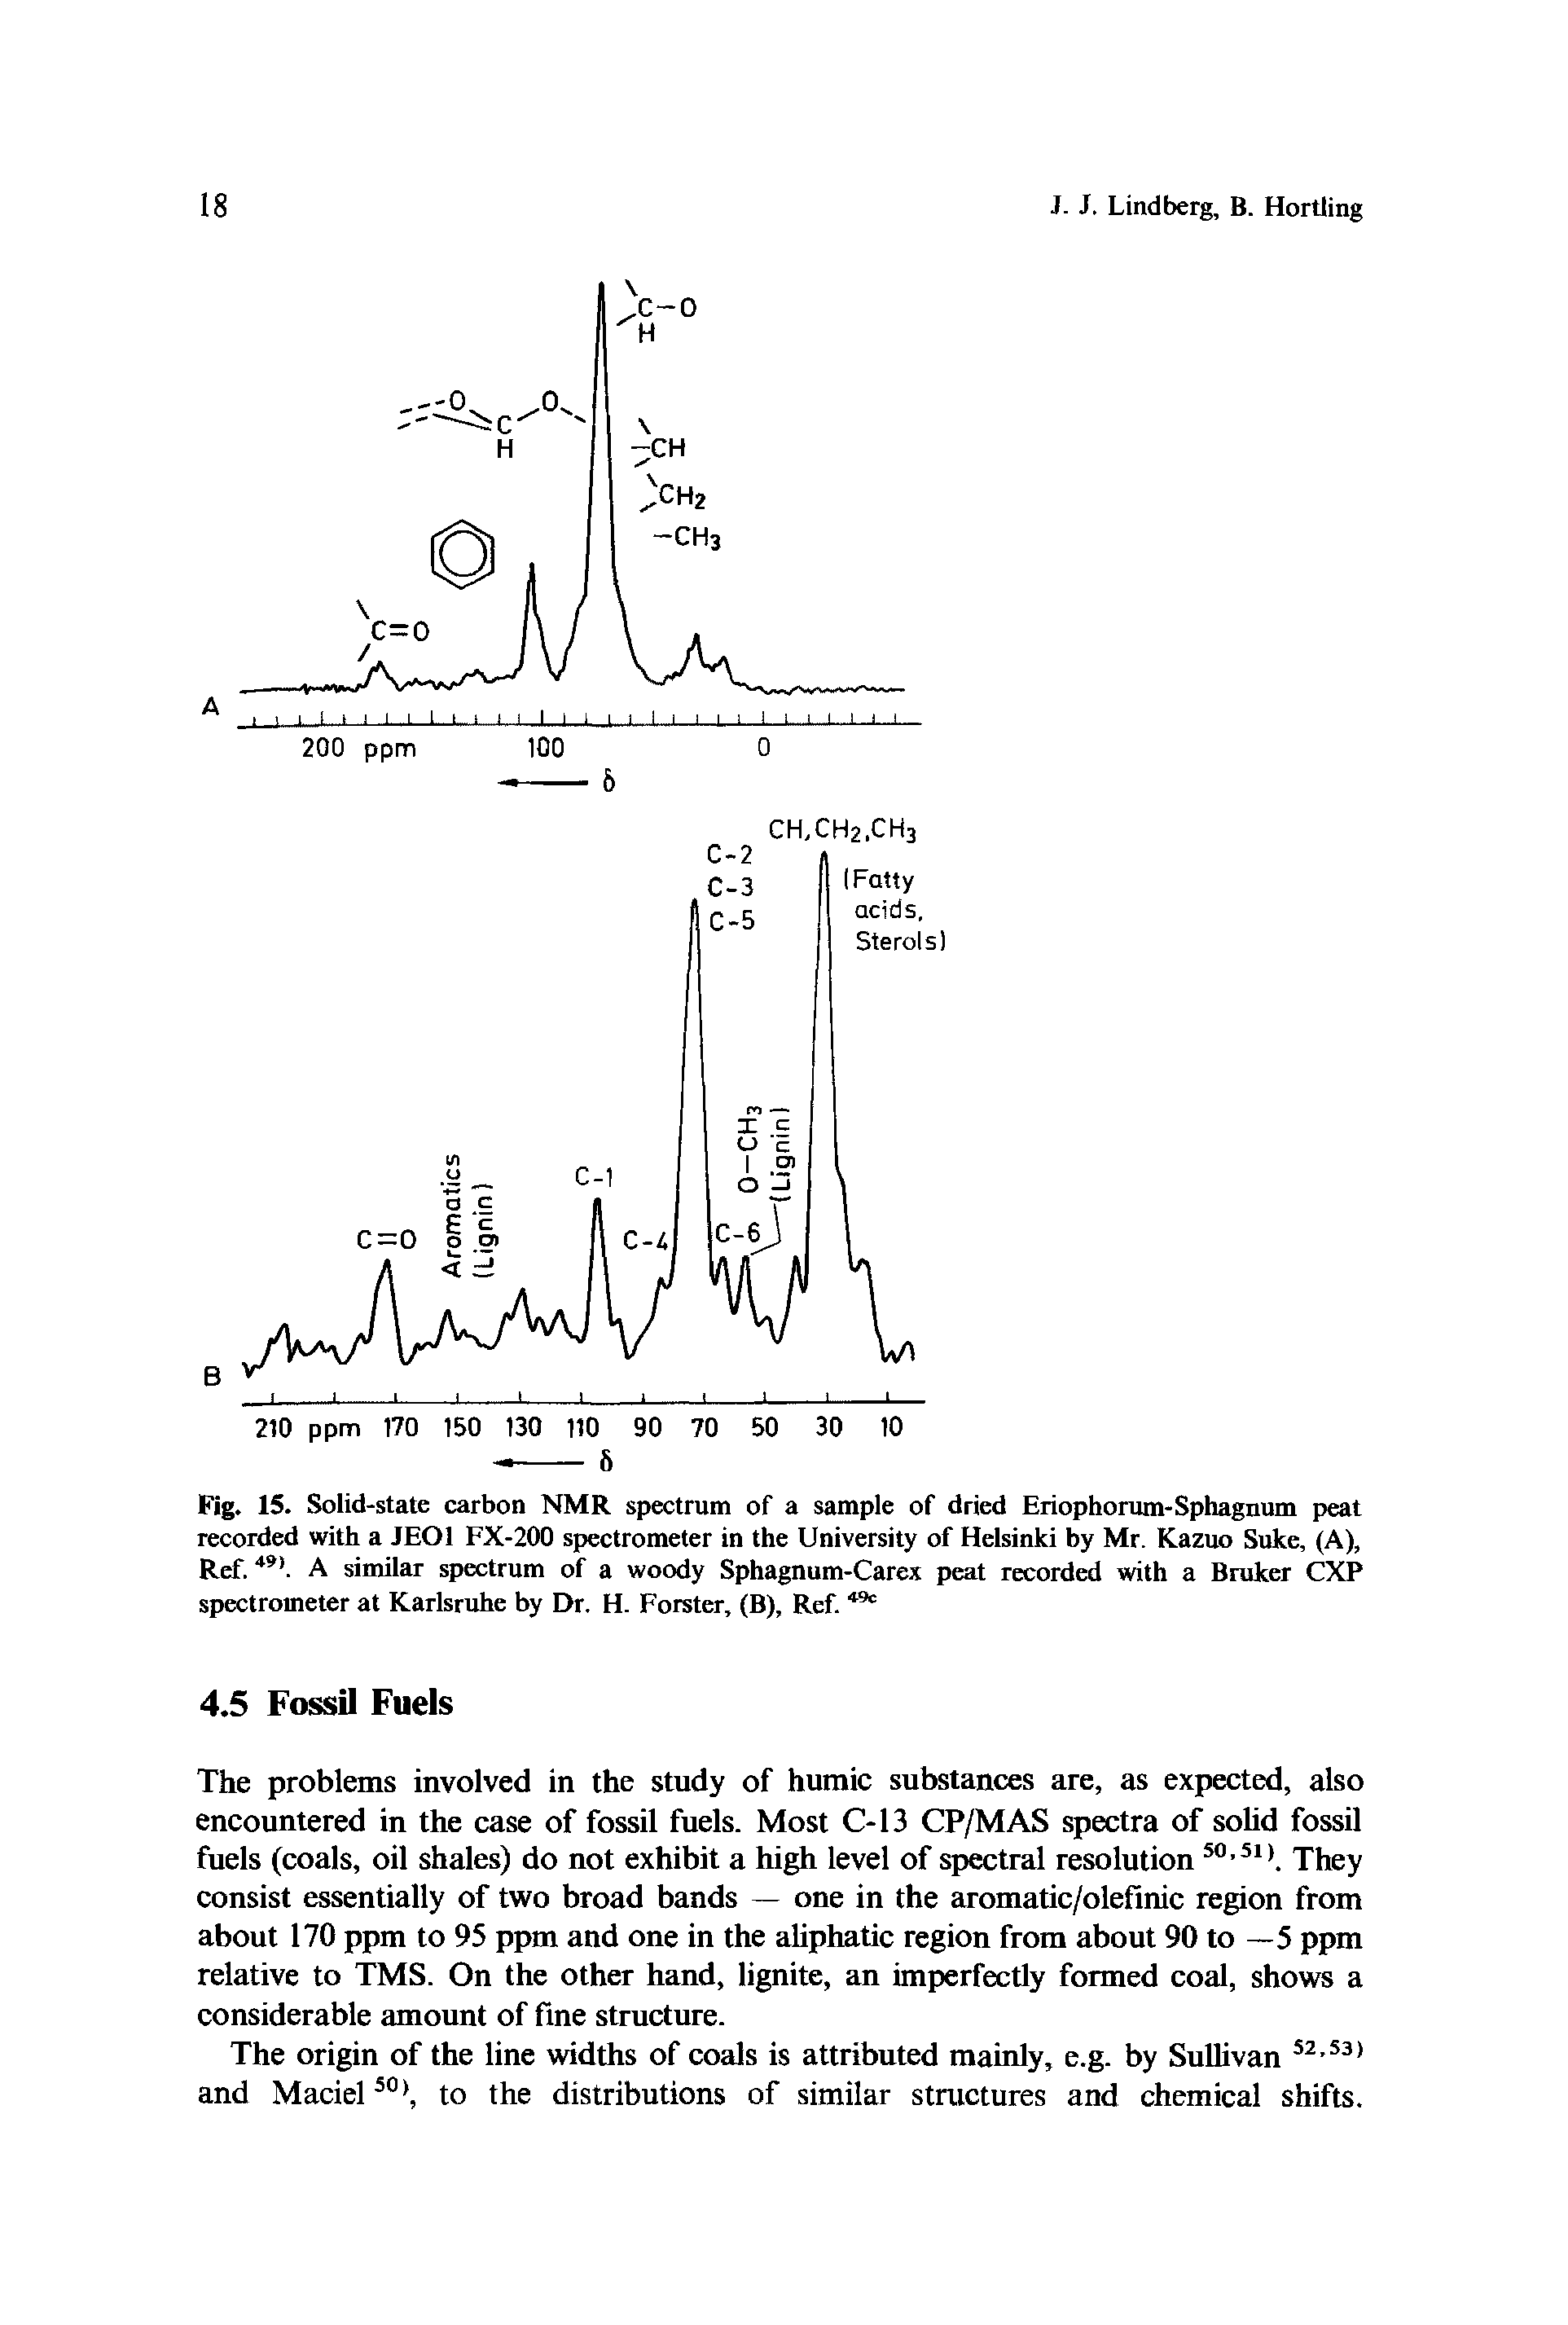 Fig. 15. Solid-state carbon NMR spectrum of a sample of dried Eriophorum-Sphagnum peat recorded with a JEOl FX-200 spectrometer in the University of Helsinki by Mr. Kazuo Suke, (A), Ref.491. A similar spectrum of a woody Sphagnum-Carex peat recorded with a Bruker CXP spectrometer at Karlsruhe by Dr. H. Forster, (B), Ref. 49c...